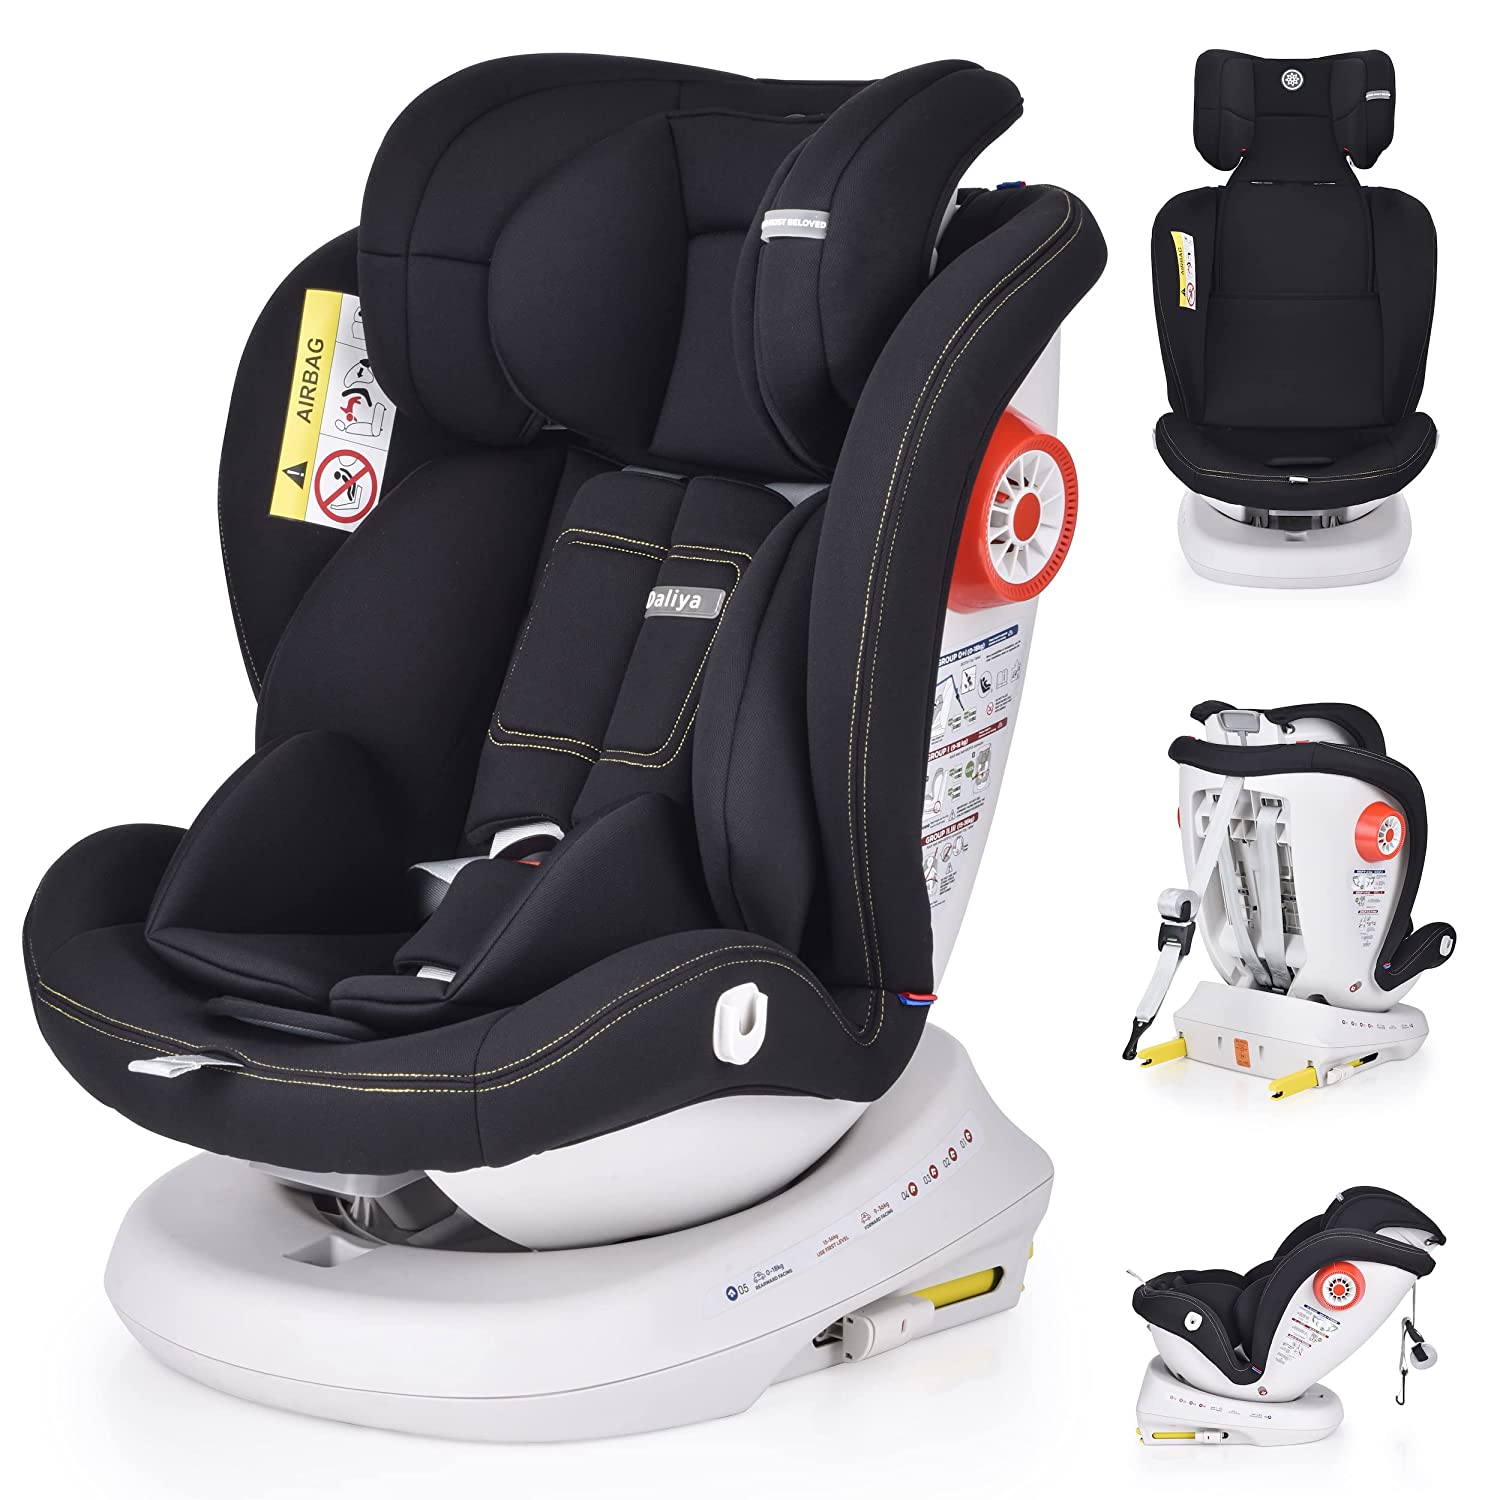 Daliya® ROTAZIONE Child Seat 0-36 kg with Isofix - Side Impact Protection (SIP) - Top Tether - 360° Rotation - 5-Point Harness - Drink Holder - Sun Cover - Baby Car Seat Group 0+ / I/II/III (Black)